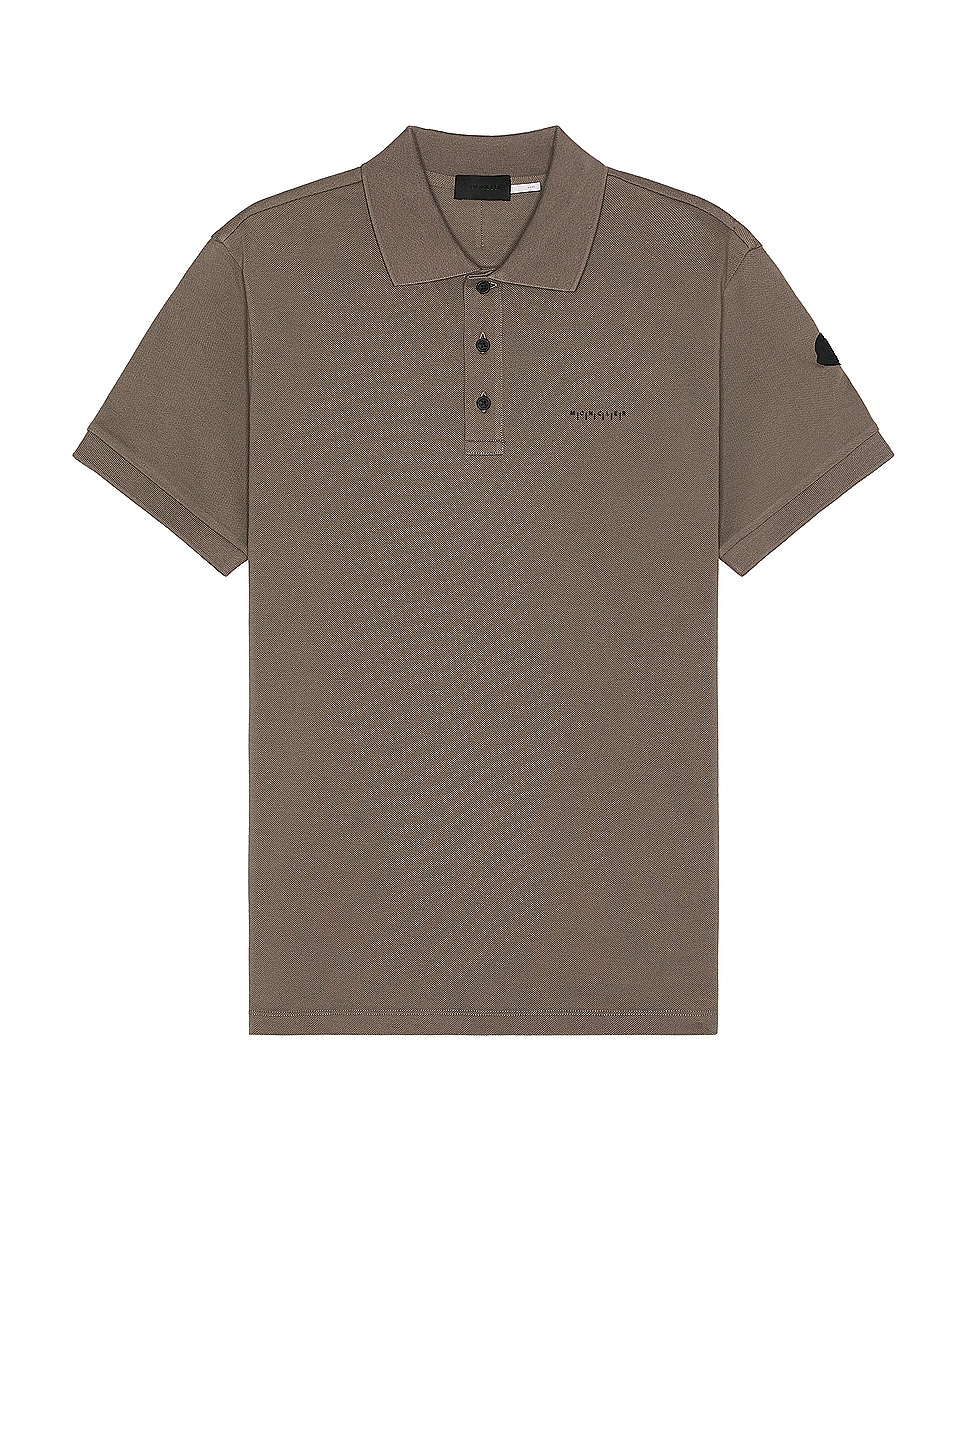 Image 1 of Moncler Short Sleeve Polo in Taupe Gray